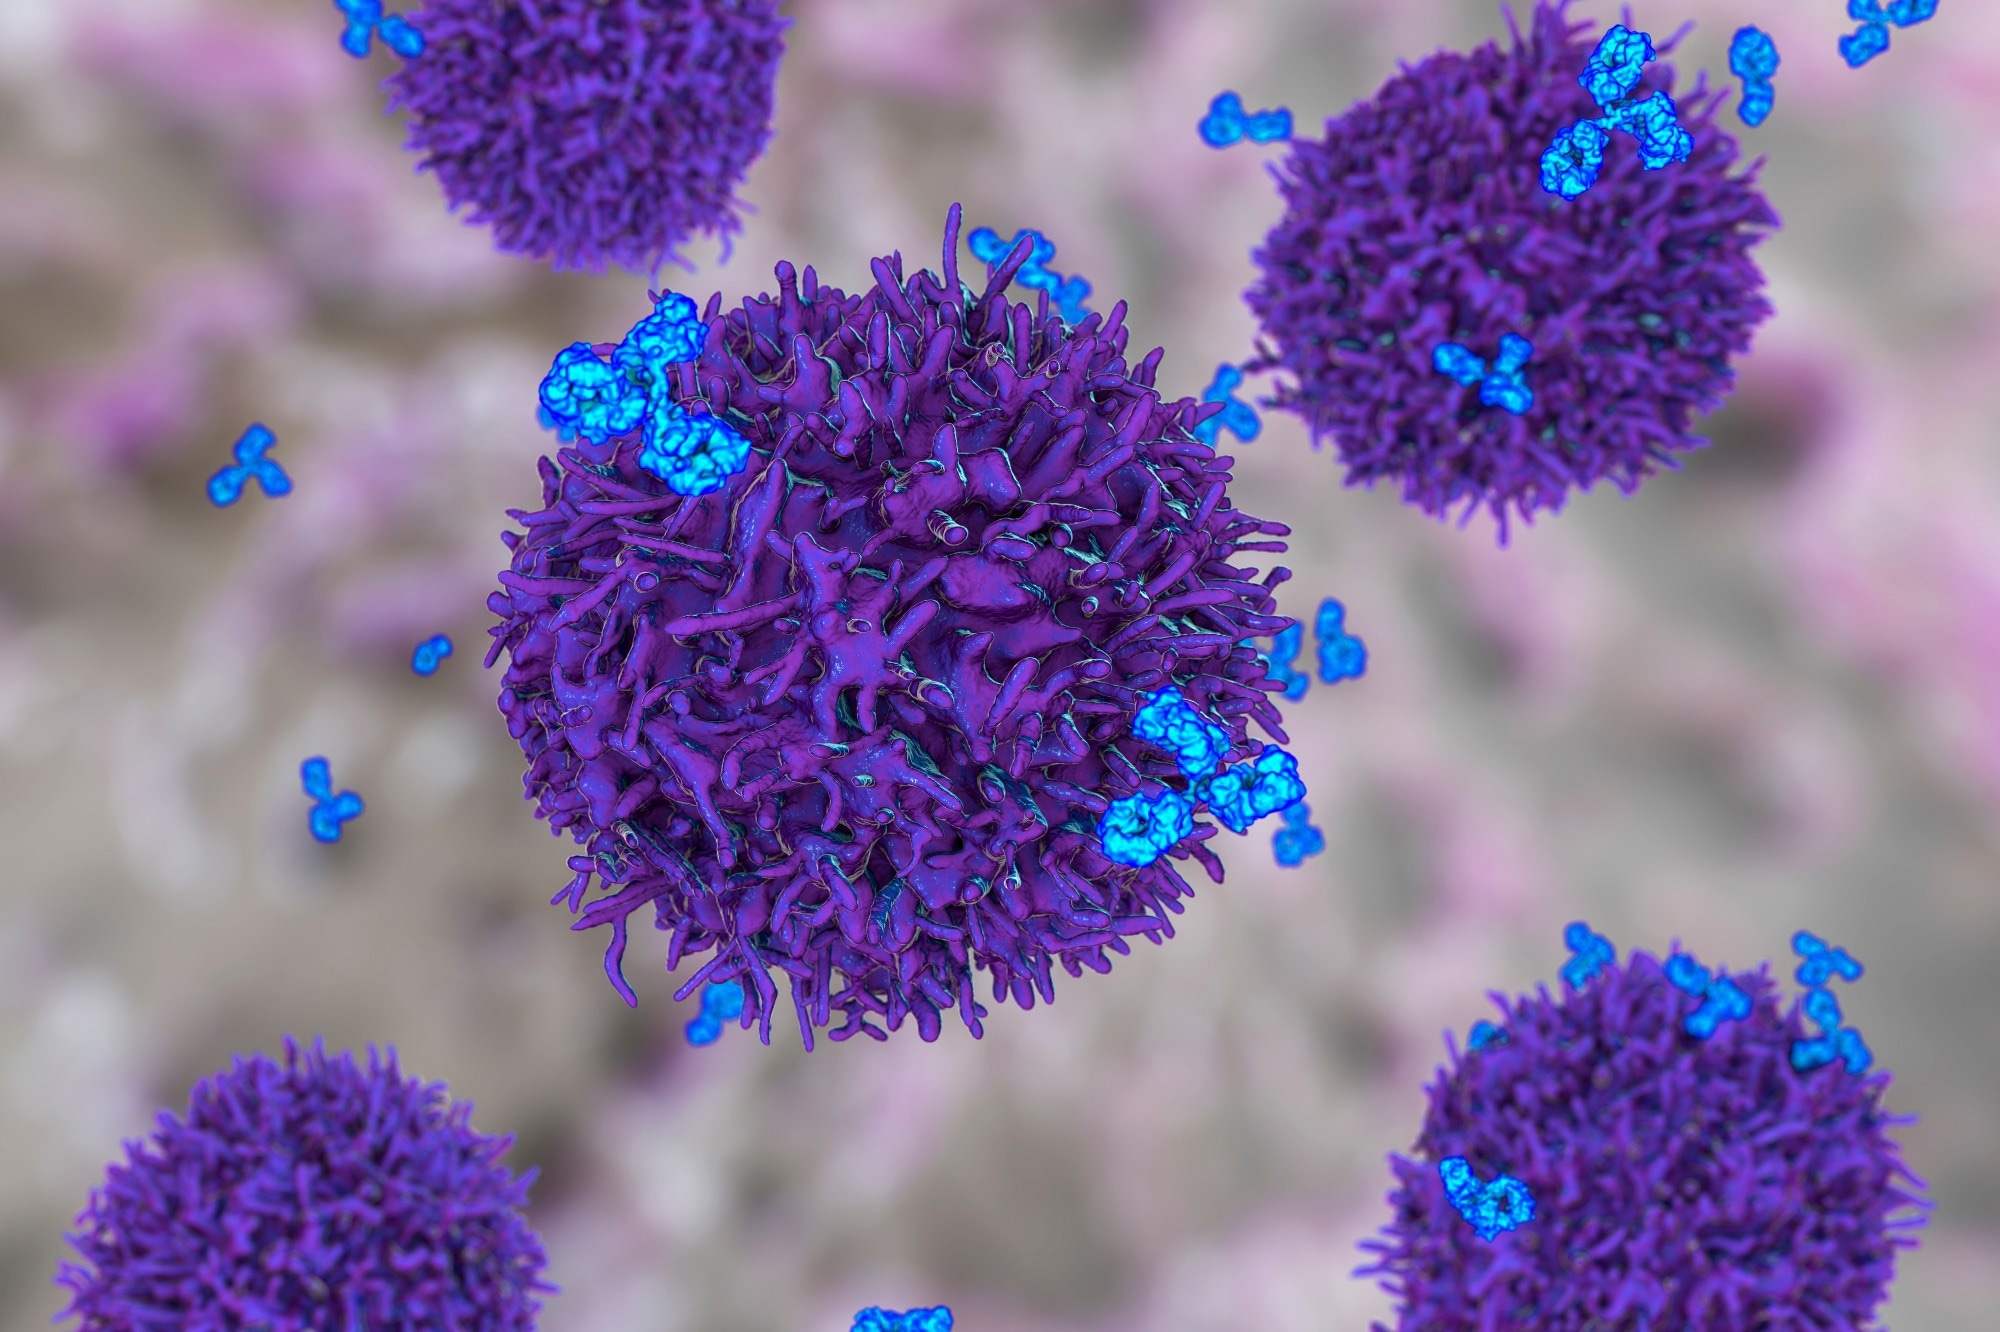 Study: B Cells in Breast Cancer Pathology. Image Credit: Kateryna Kon/Shutterstock